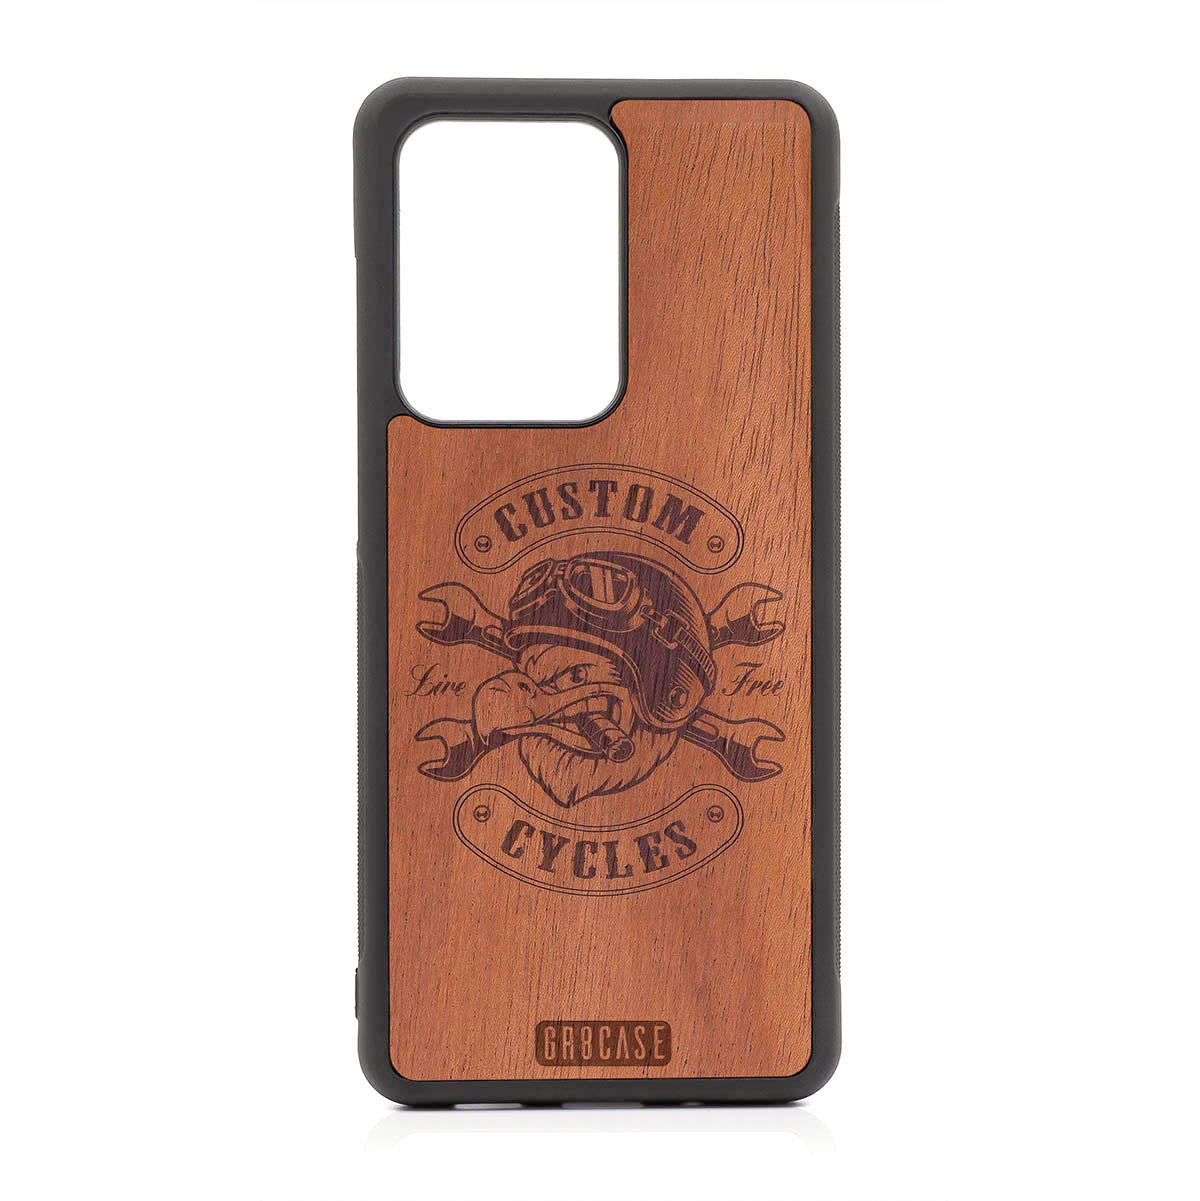 Custom Cycles Live Free (Biker Eagle) Design Wood Case For Samsung Galaxy S20 Ultra by GR8CASE